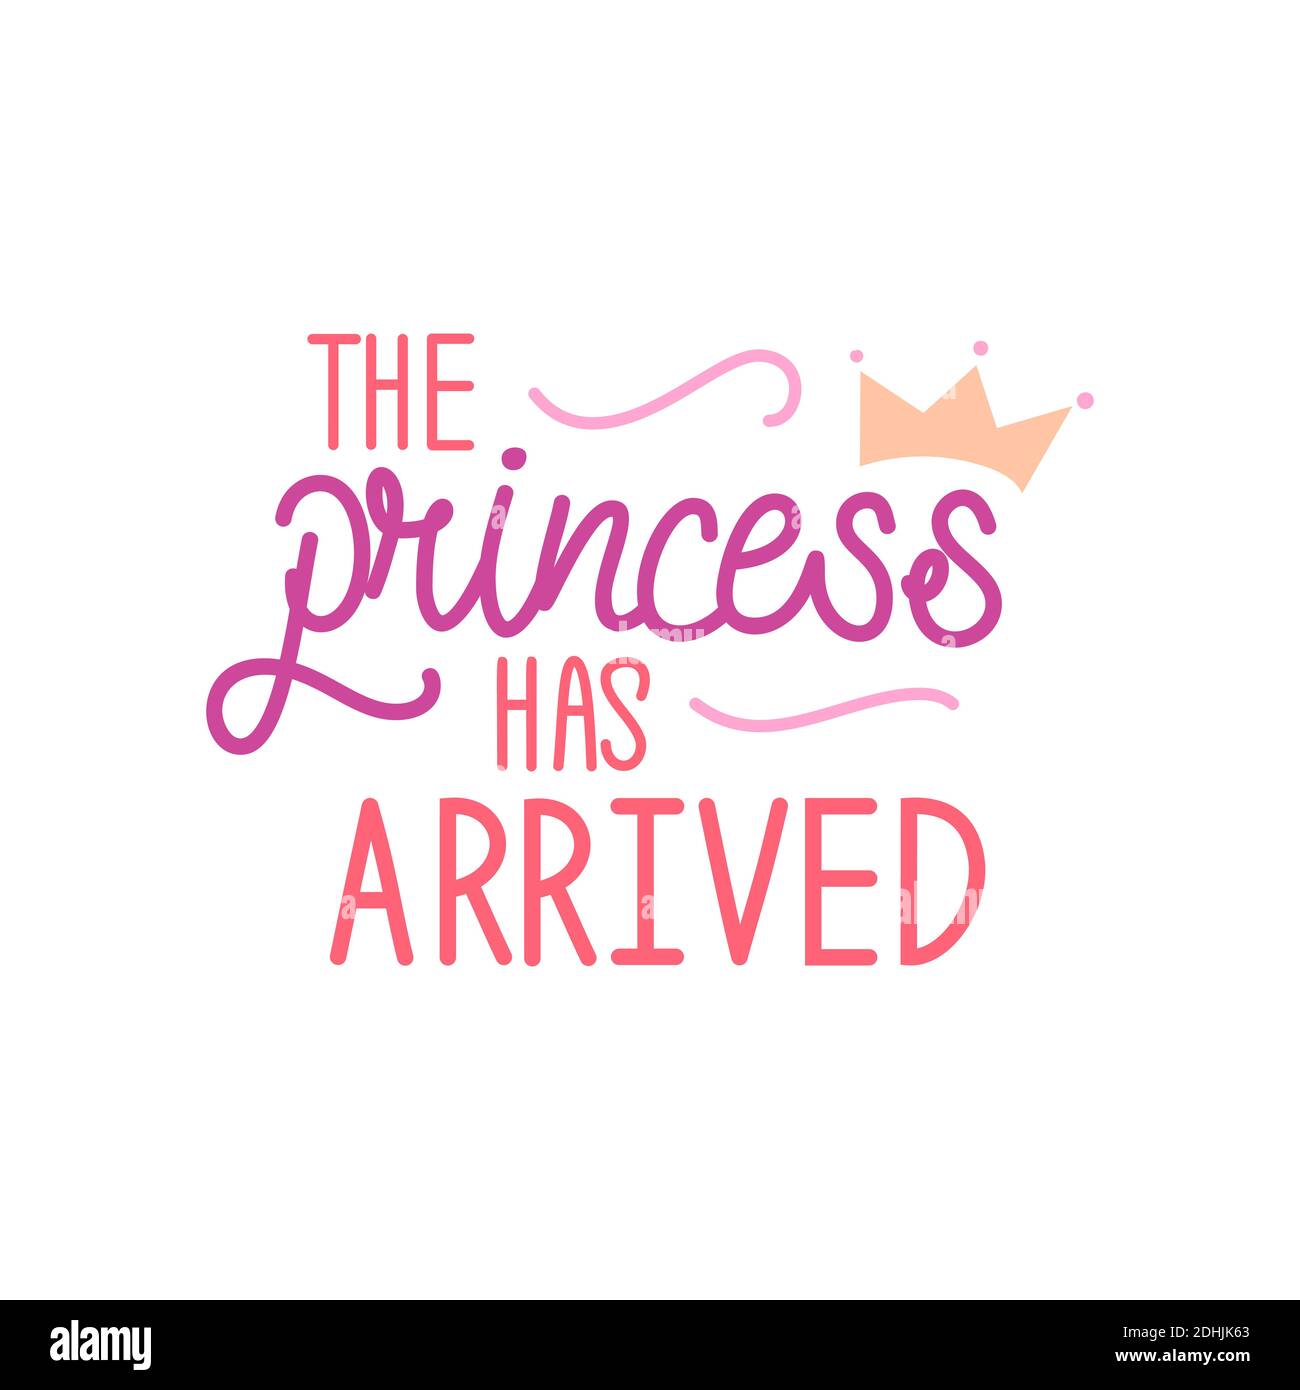 the princess has arrived logo sign inspirational quotes and motivational typography art lettering composition design background Stock Vector